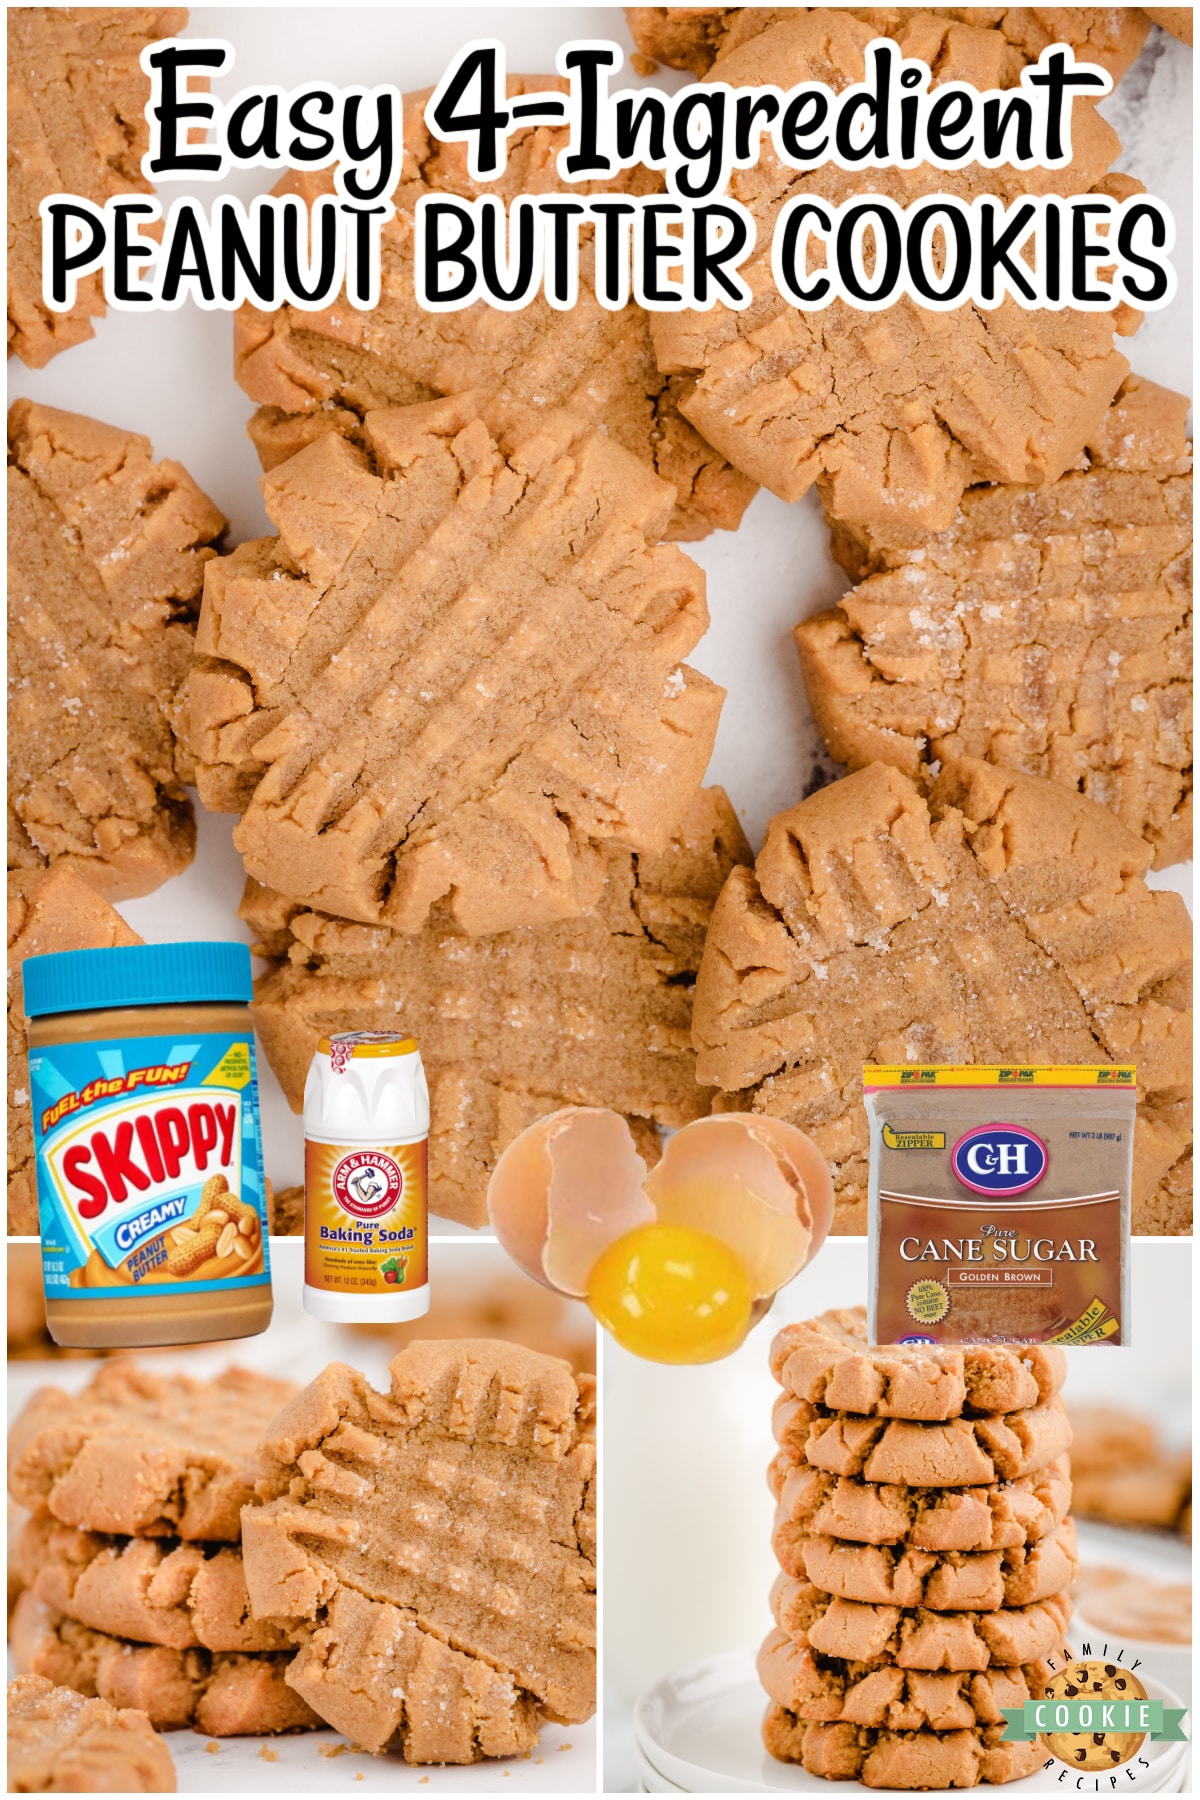 Easy Peanut Butter Cookies made with just a handful of ingredients and no flour! Chewy peanut butter cookie recipe made in minutes & perfect for peanut butter lovers!